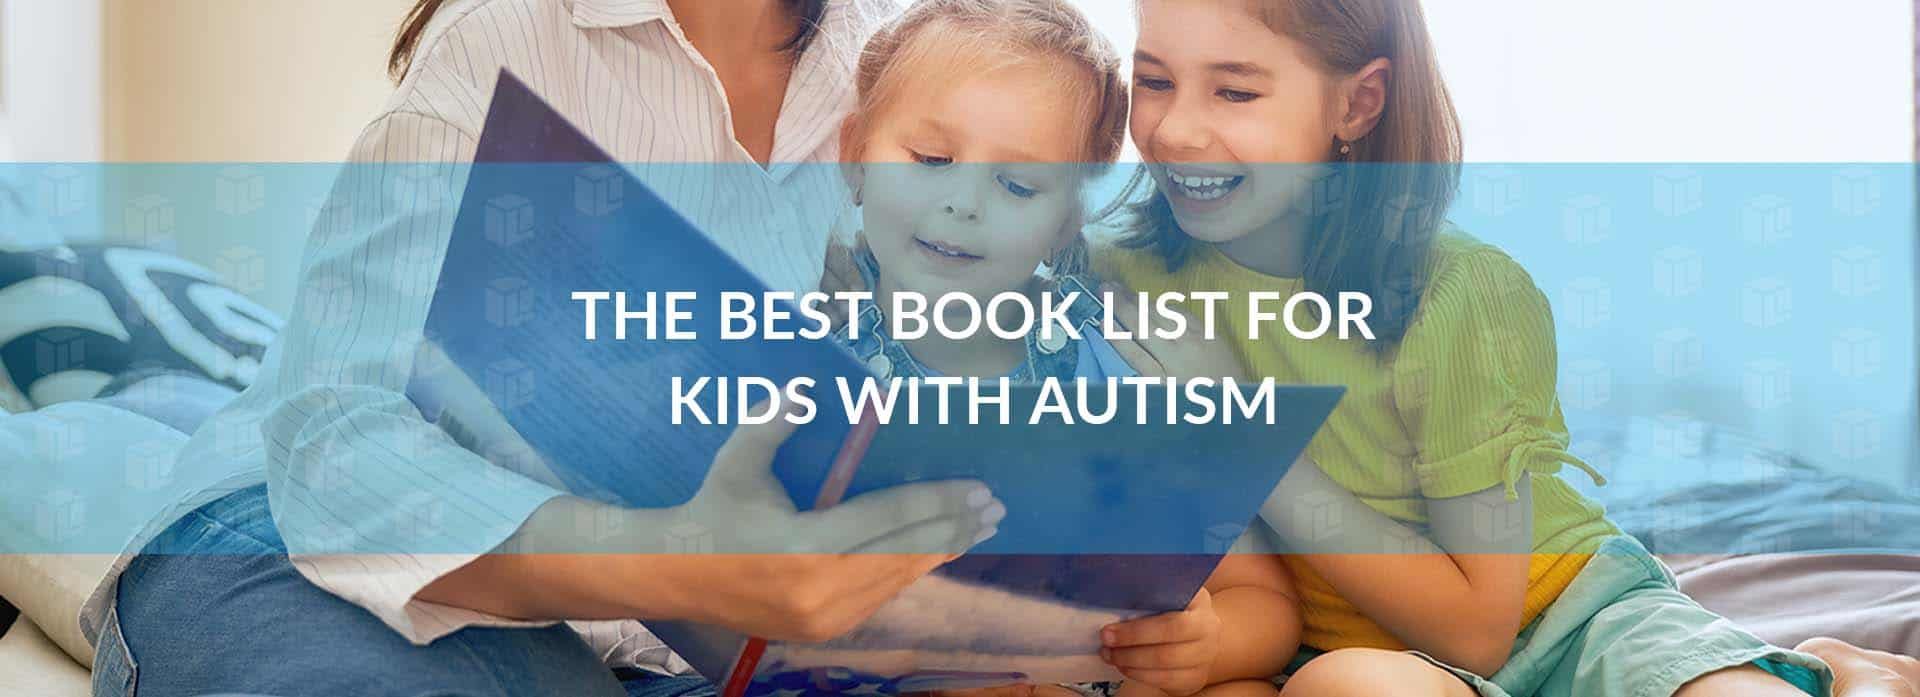 The Best Book List For Kids With Autism The Best Book List For Kids With Autism The Best Book List For Kids With Autism The Best Book List For Kids With Autism